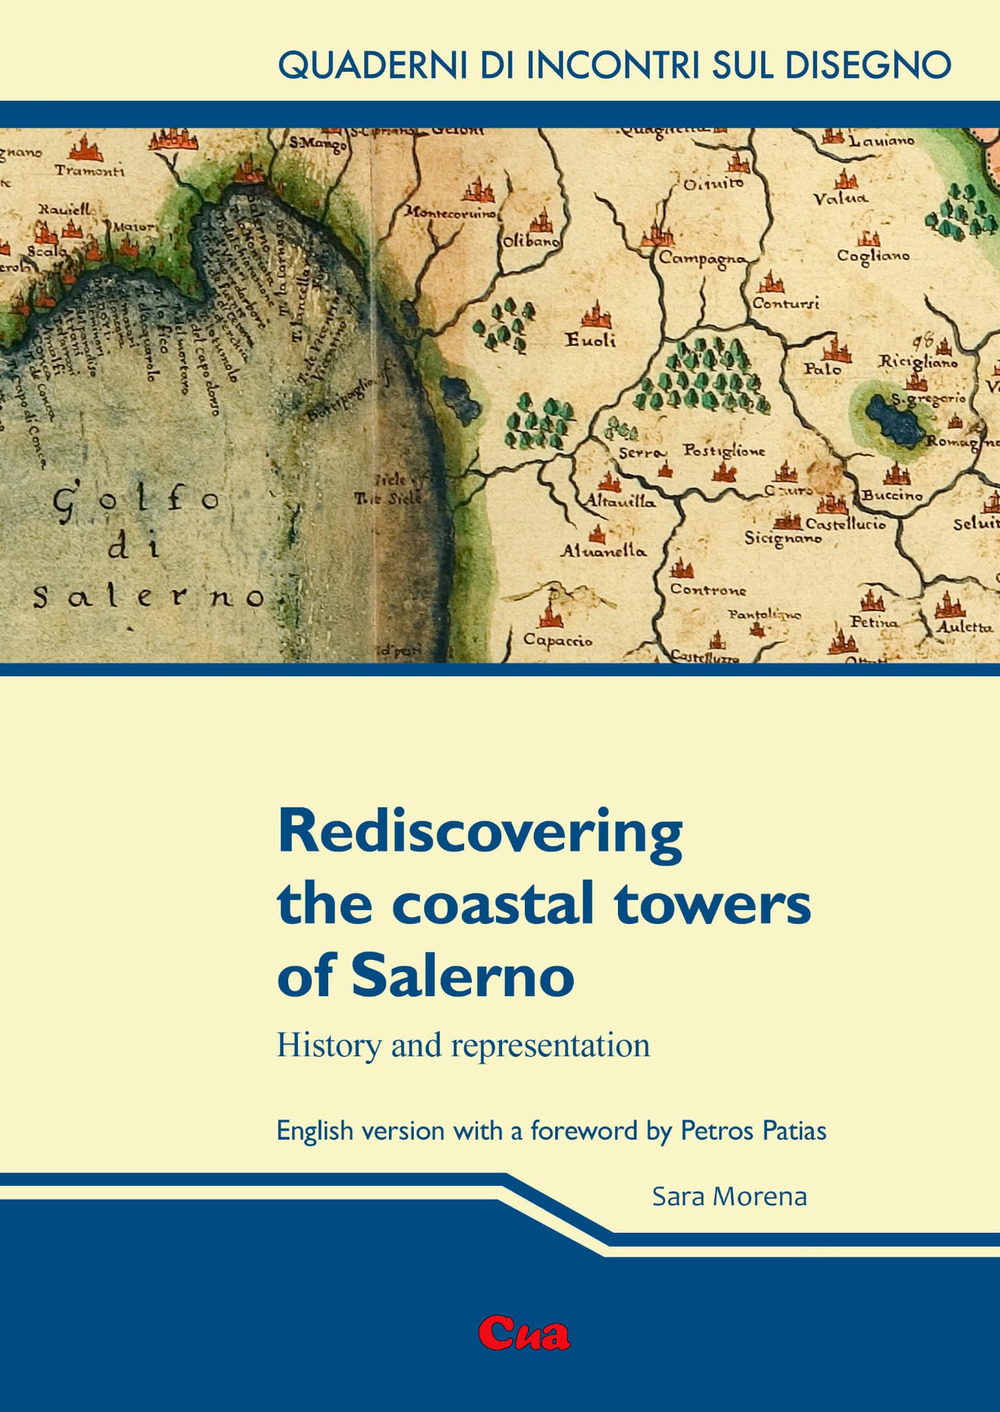 Rediscovering the coastal towers of Salerno. History and representation